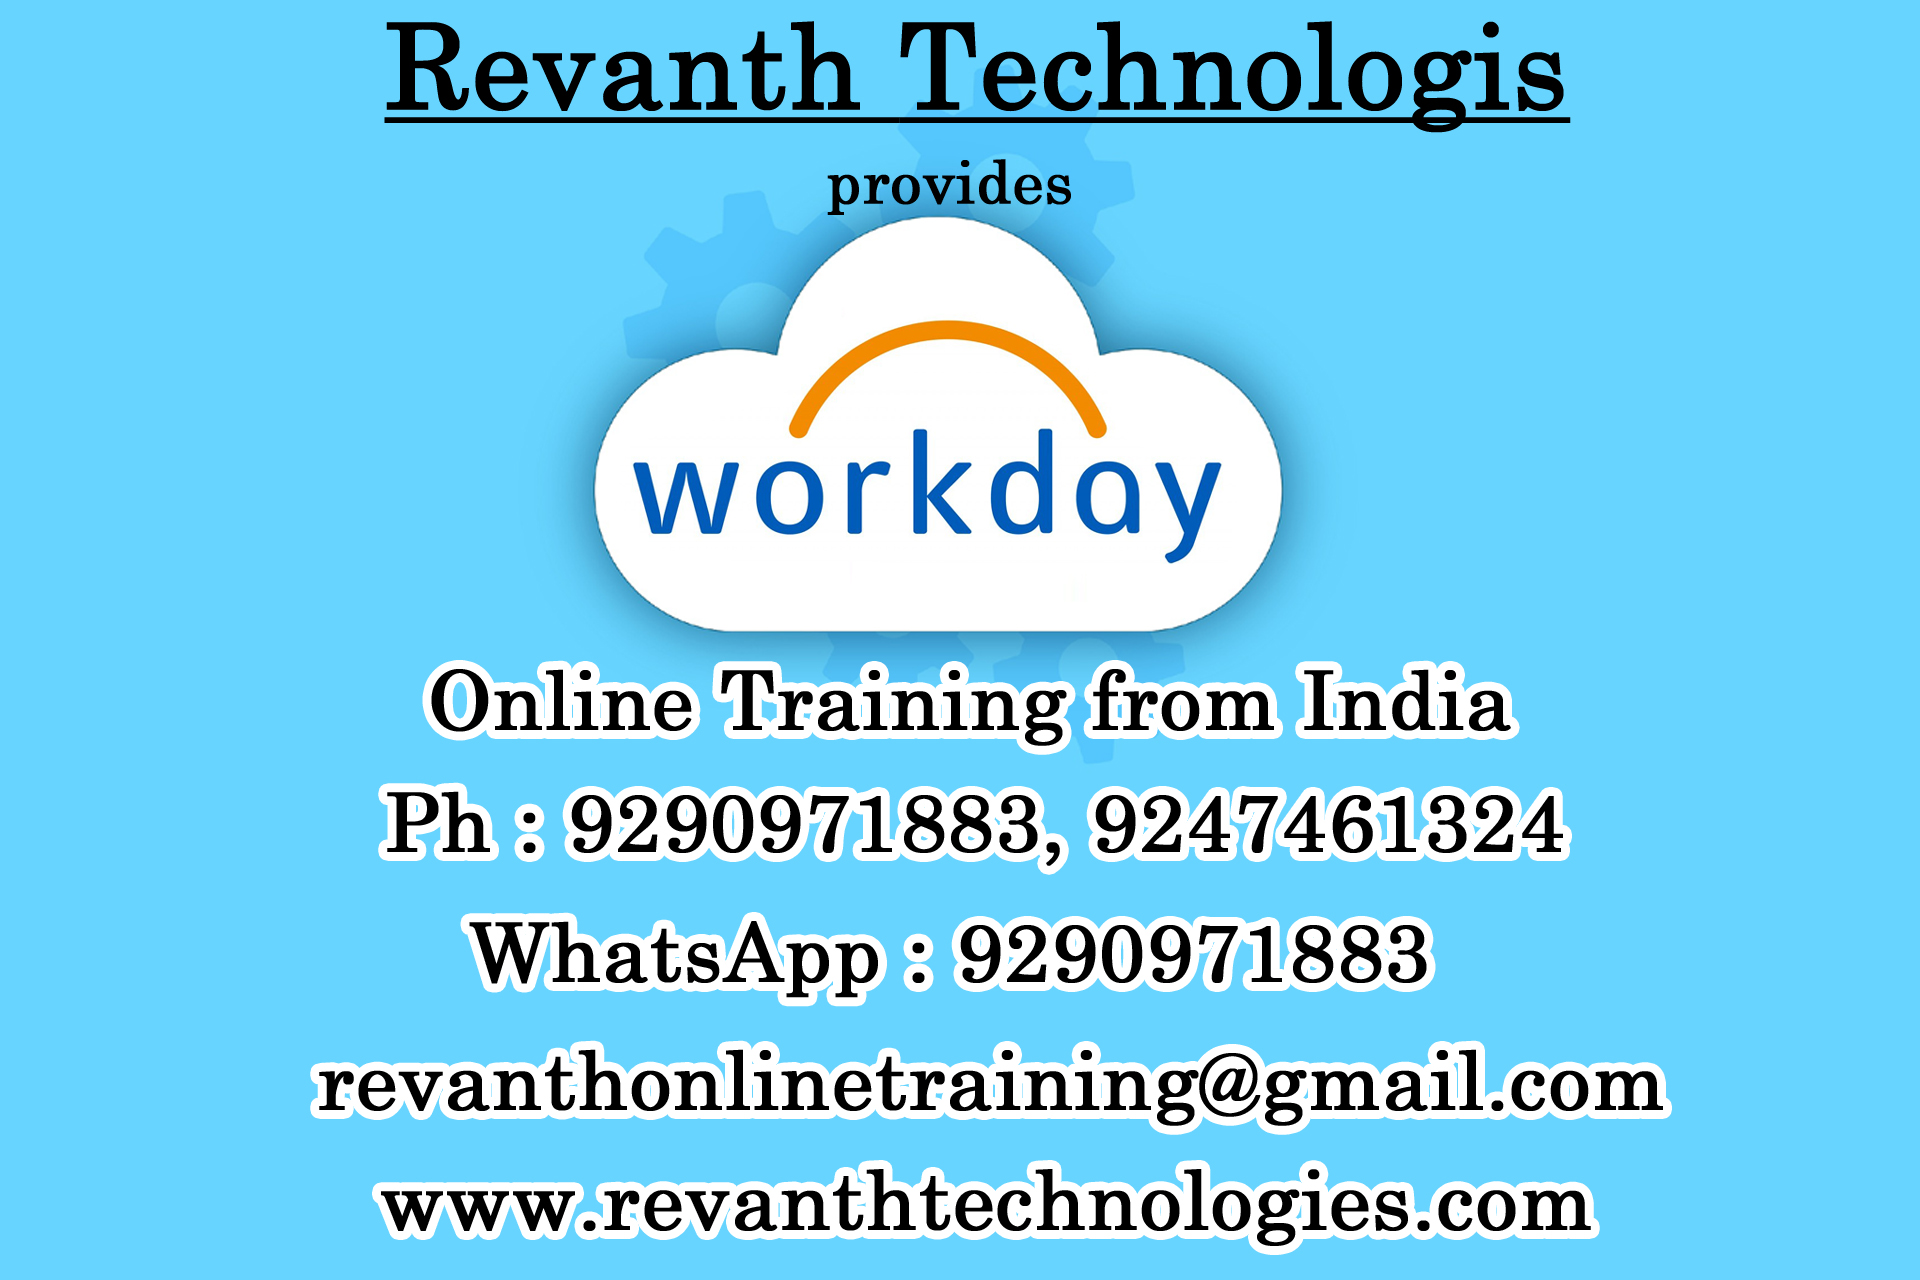 Workday Online Training from India